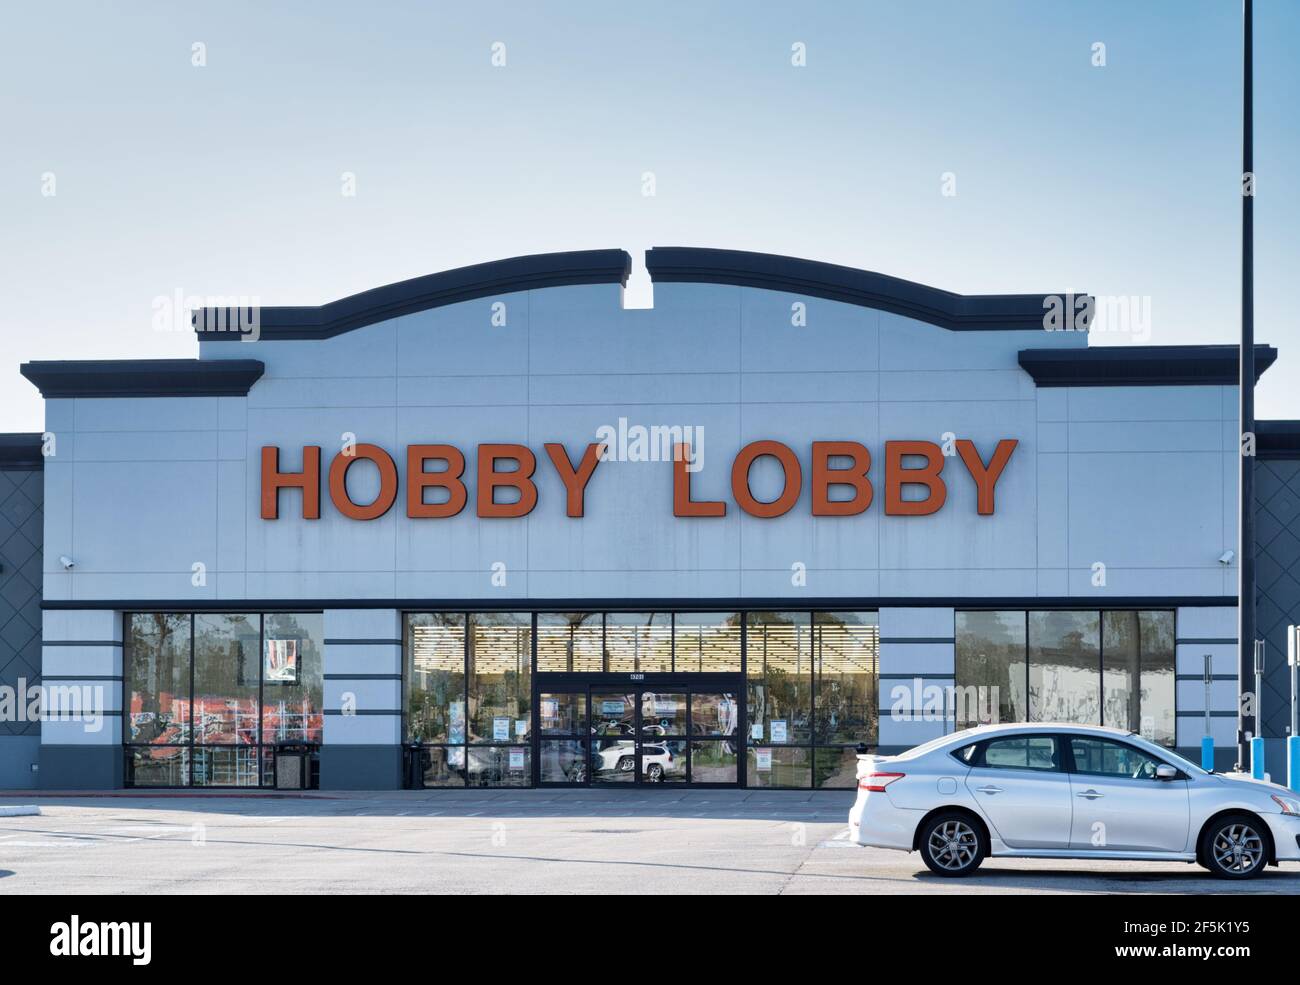 Houston, Texas USA 03-26-2021: Hobby Lobby storefront in Houston, TX. American arts and crafts store chain founded in 1972. Stock Photo